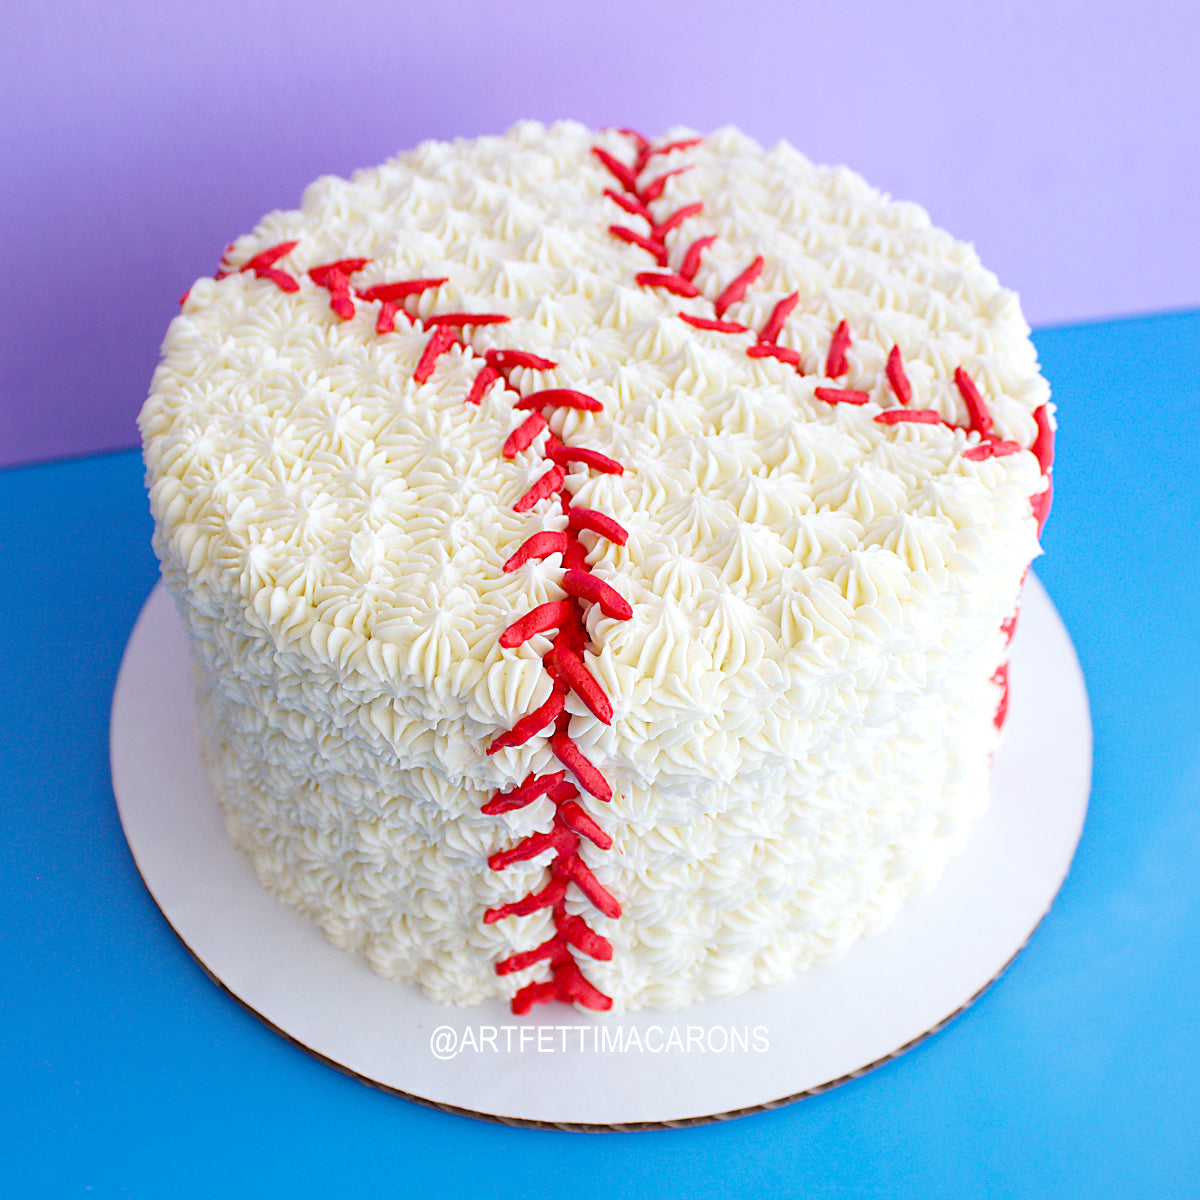 CAKES FOR SPORTS